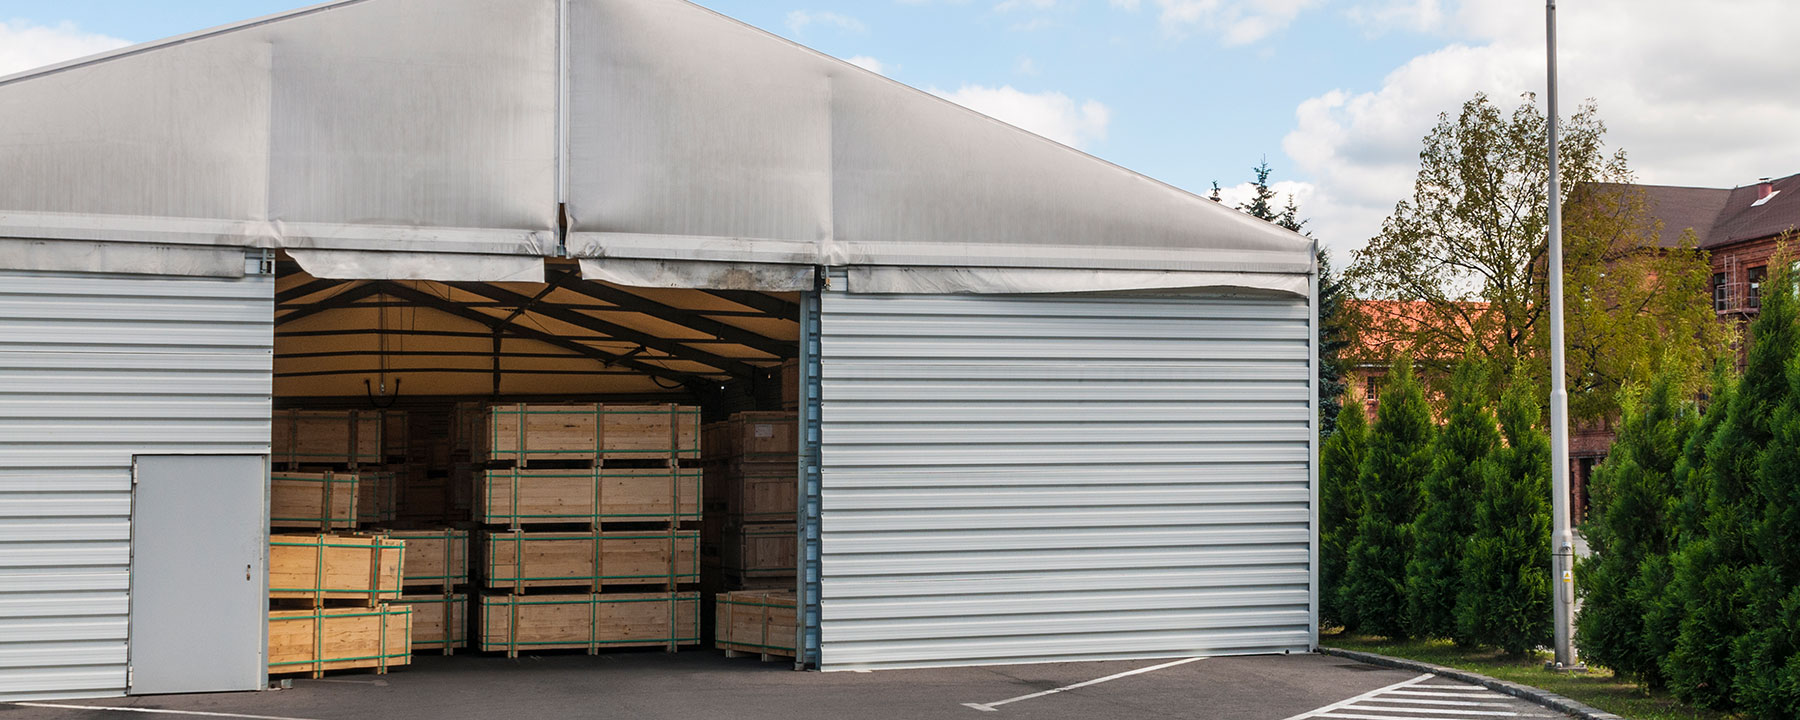 Westgate Mini Storage Developed by FIRC Group Asheville